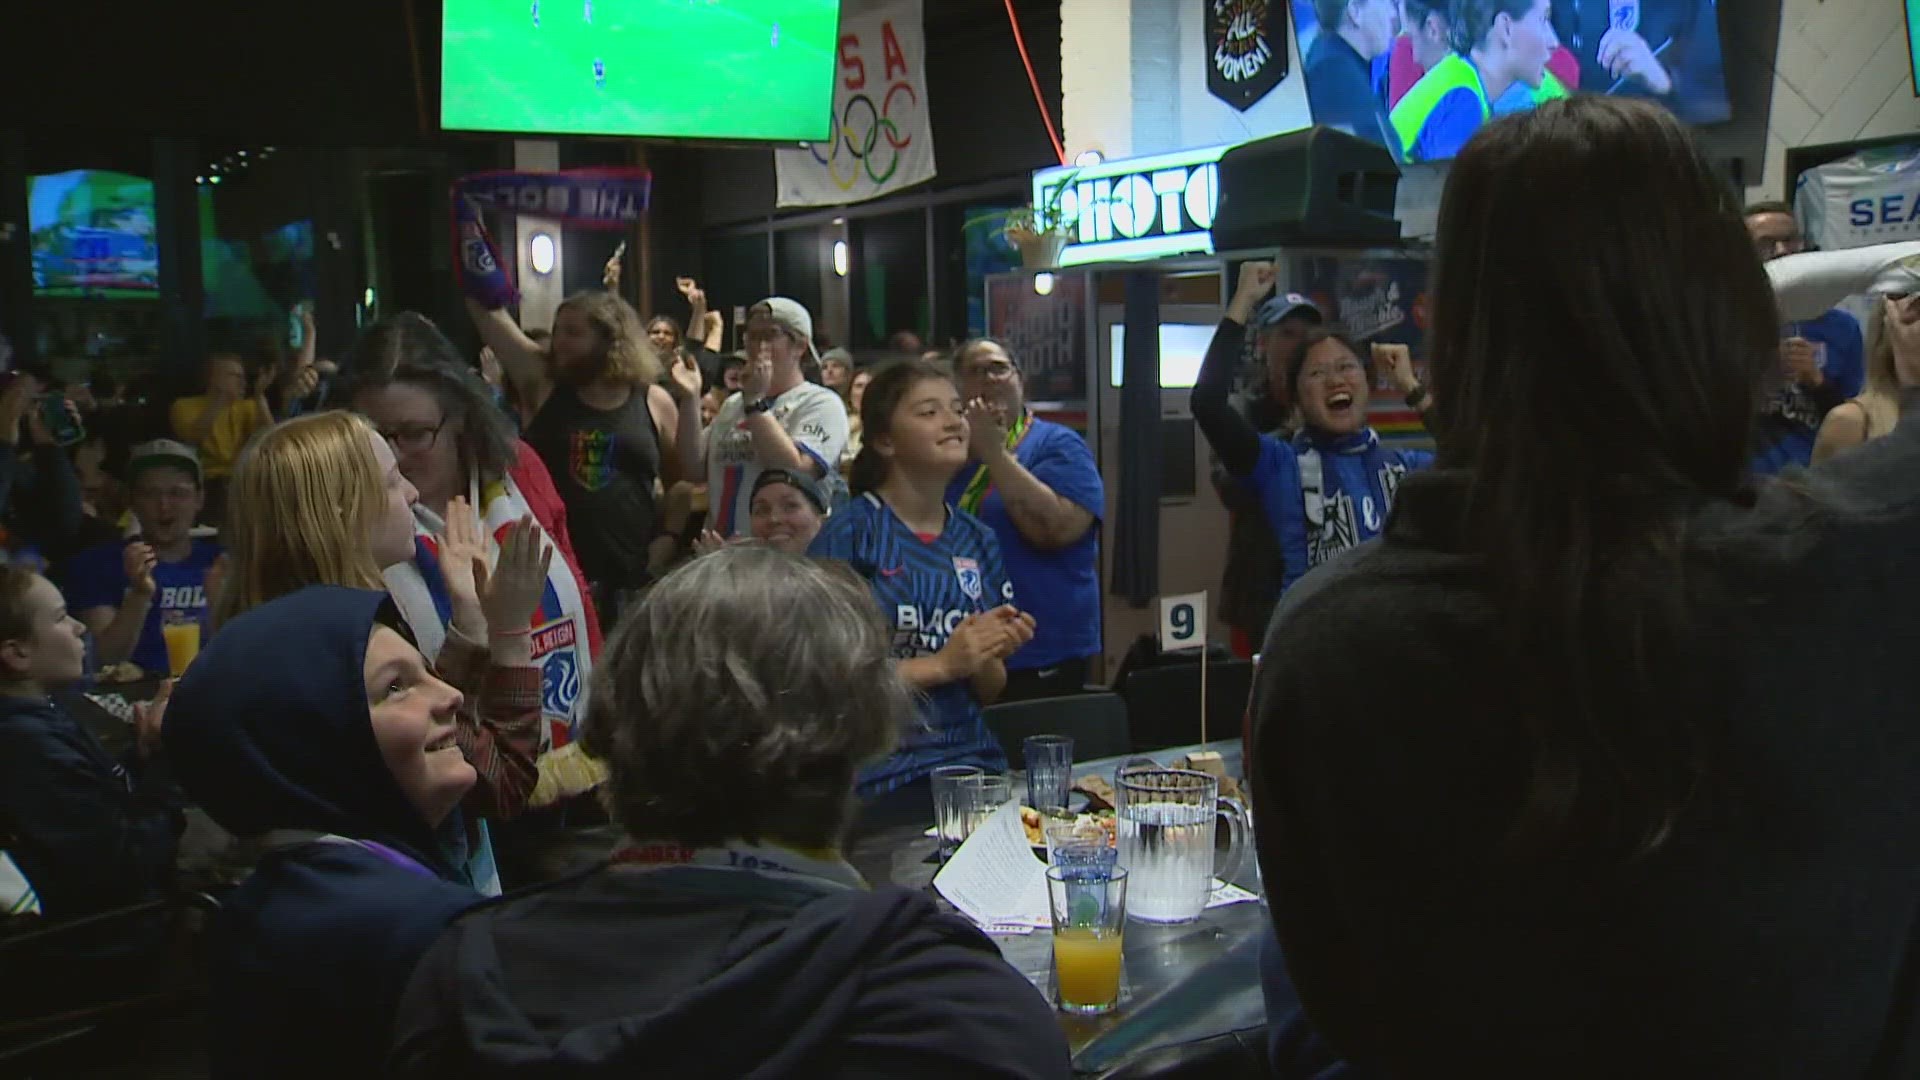 Fans gathered across western Washington at various watch parties for the NWSL Championship match on Nov. 11.